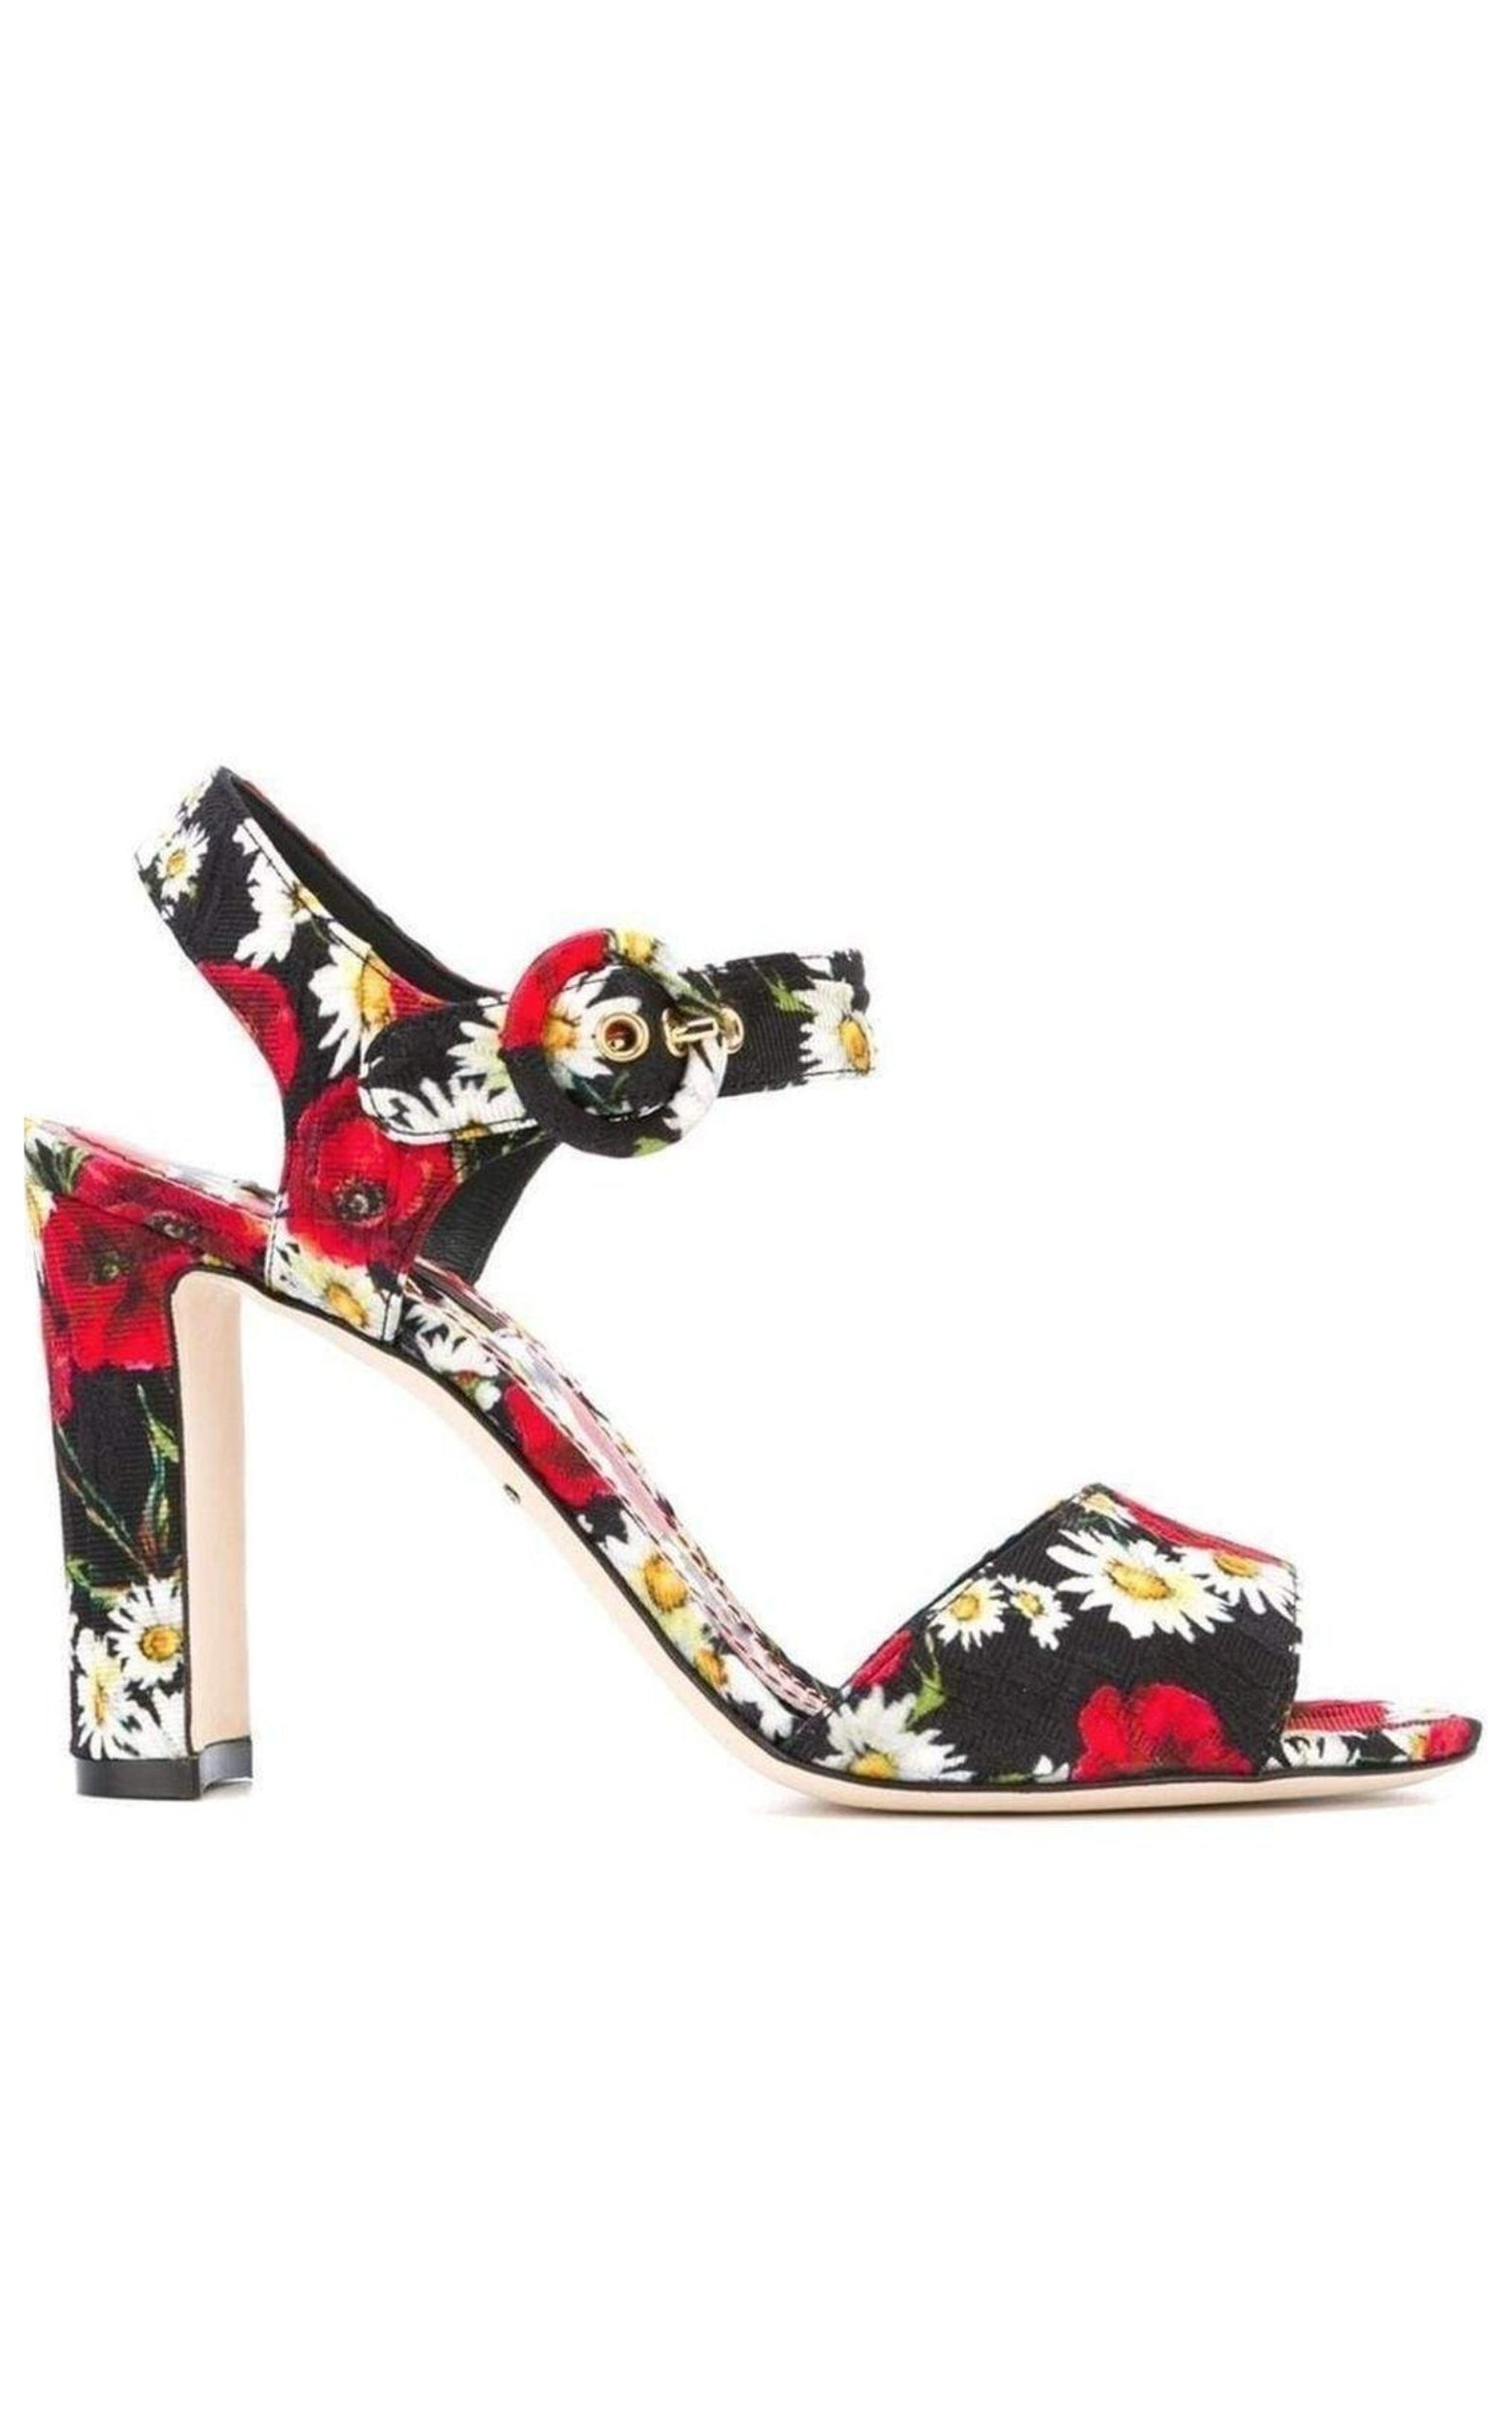 Daisy and Poppy Print Sandals - 1